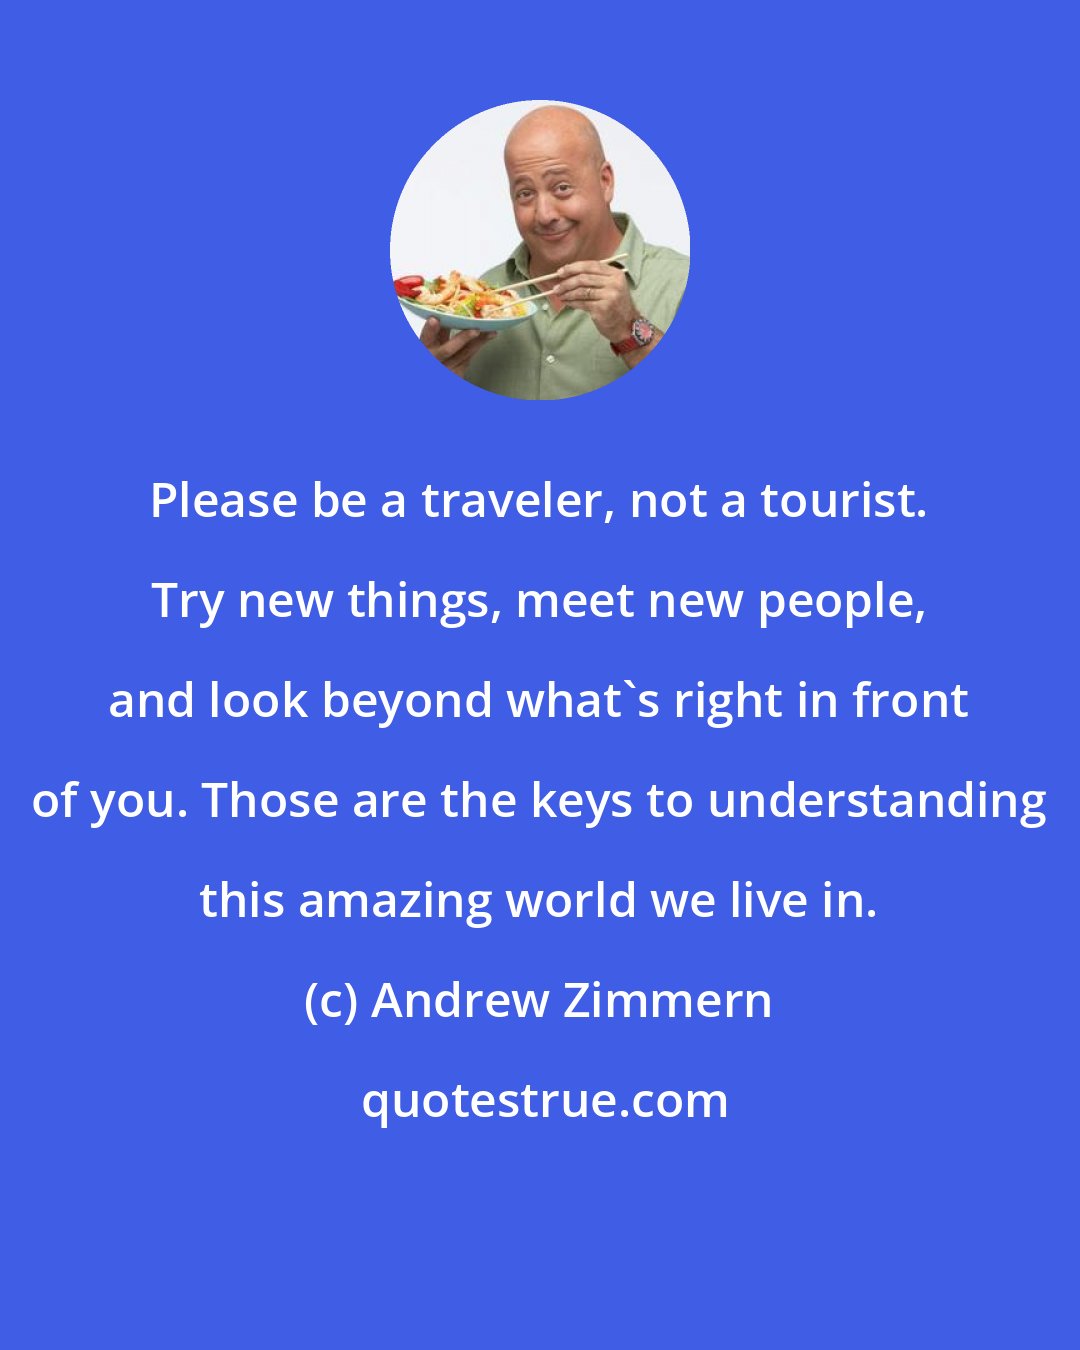 Andrew Zimmern: Please be a traveler, not a tourist. Try new things, meet new people, and look beyond what's right in front of you. Those are the keys to understanding this amazing world we live in.